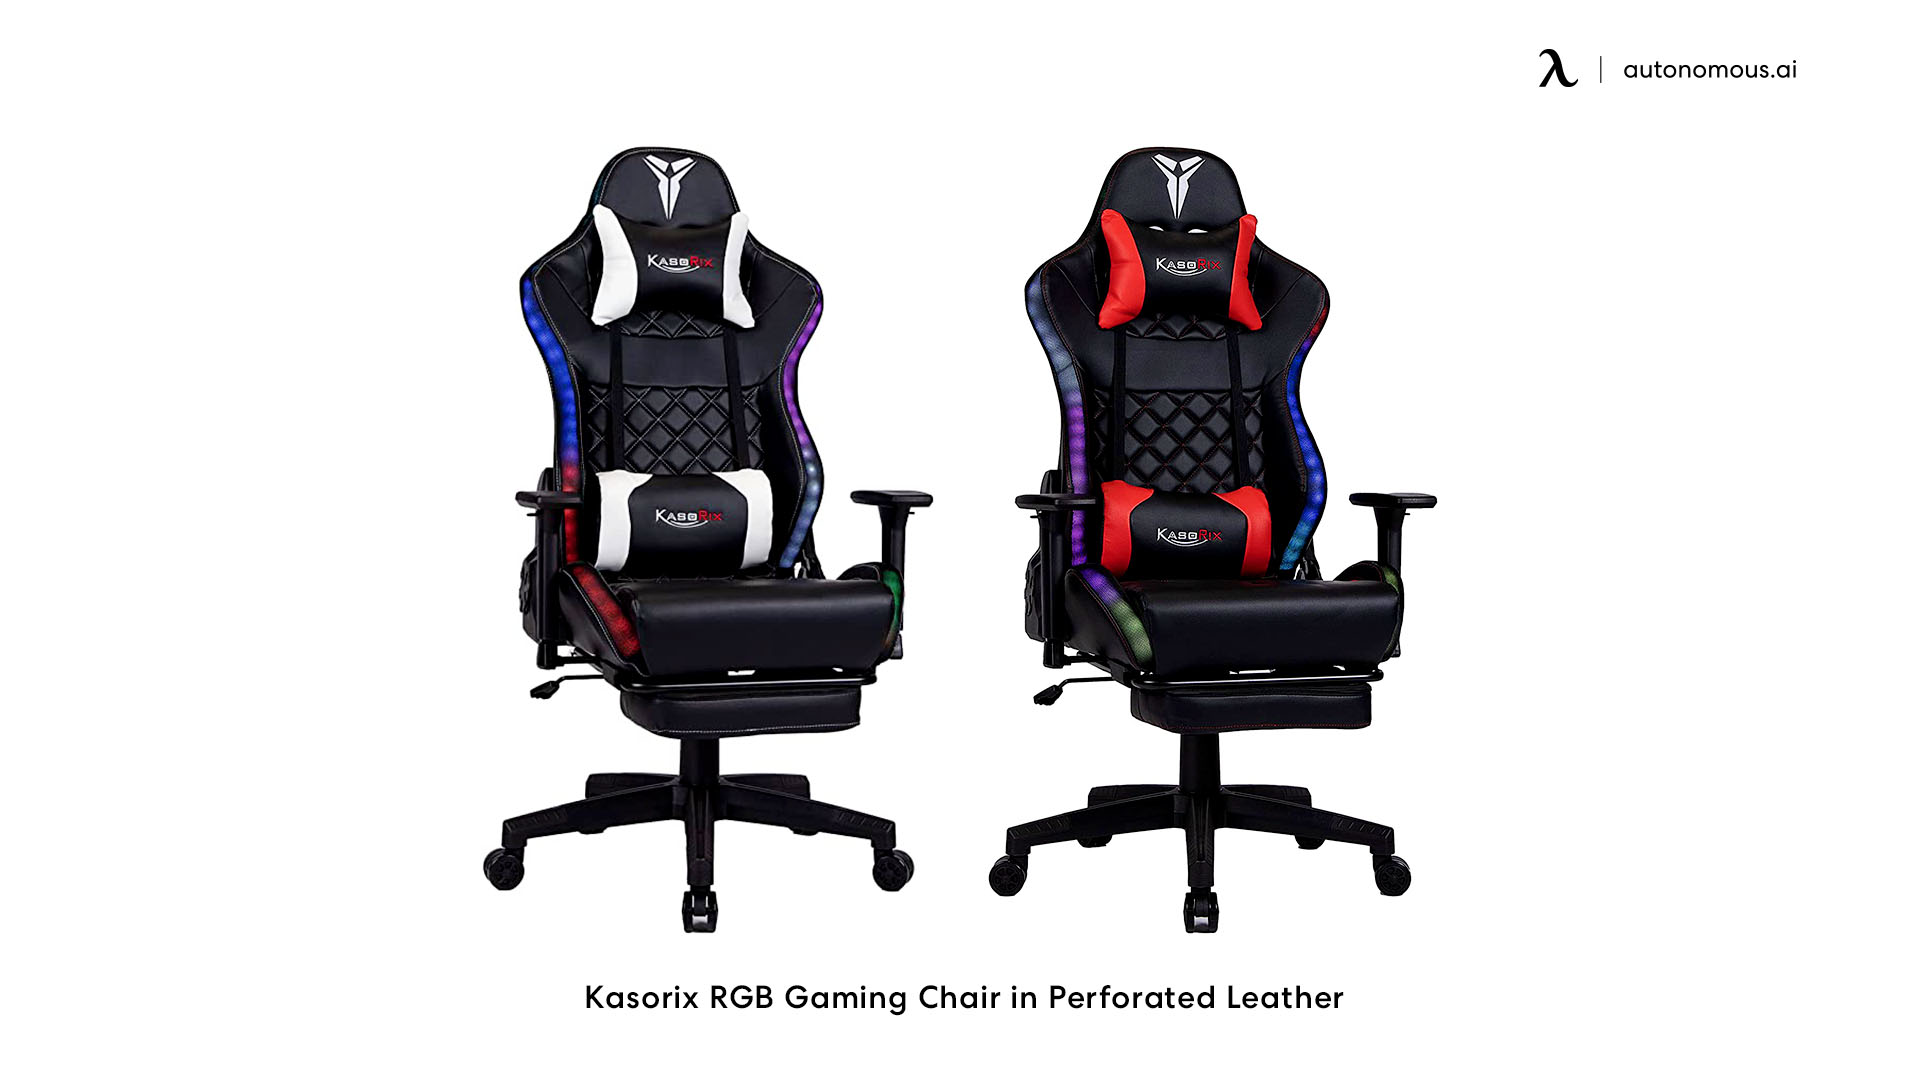 Kasorix RGB Gaming Chair in Perforated Leather